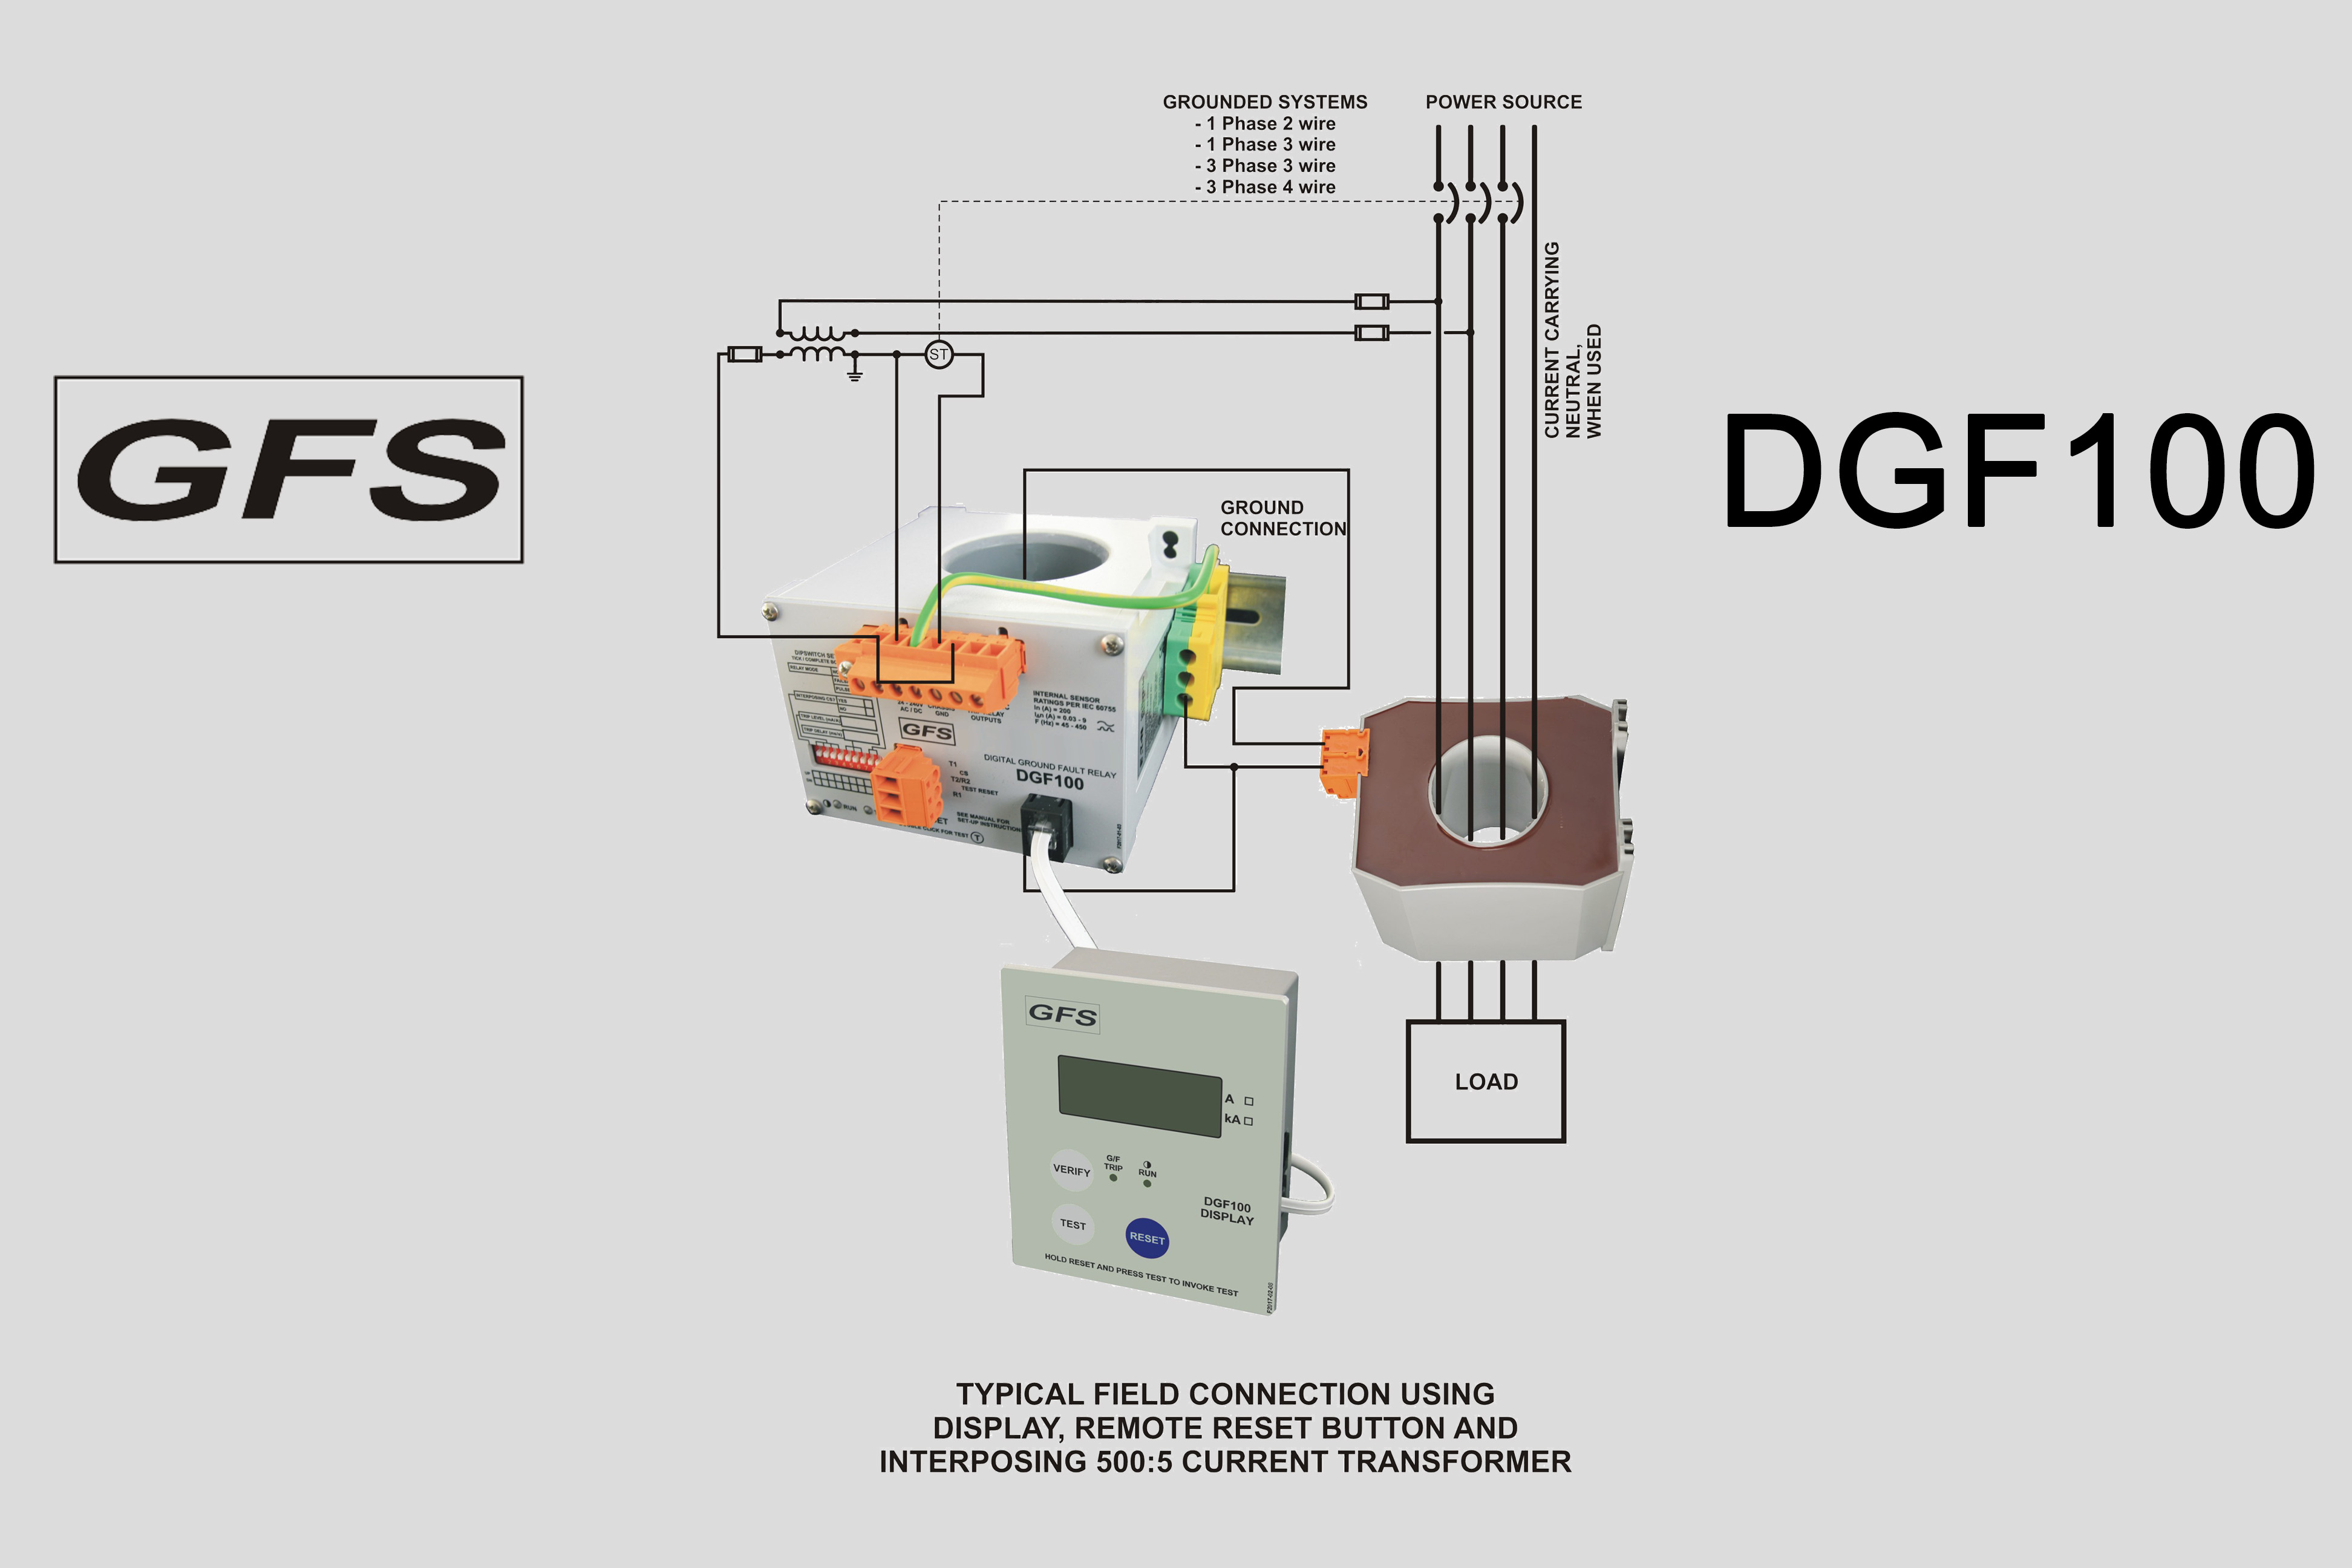 Ground Fault Relay DGF100 typical field connection using interposing current transformer